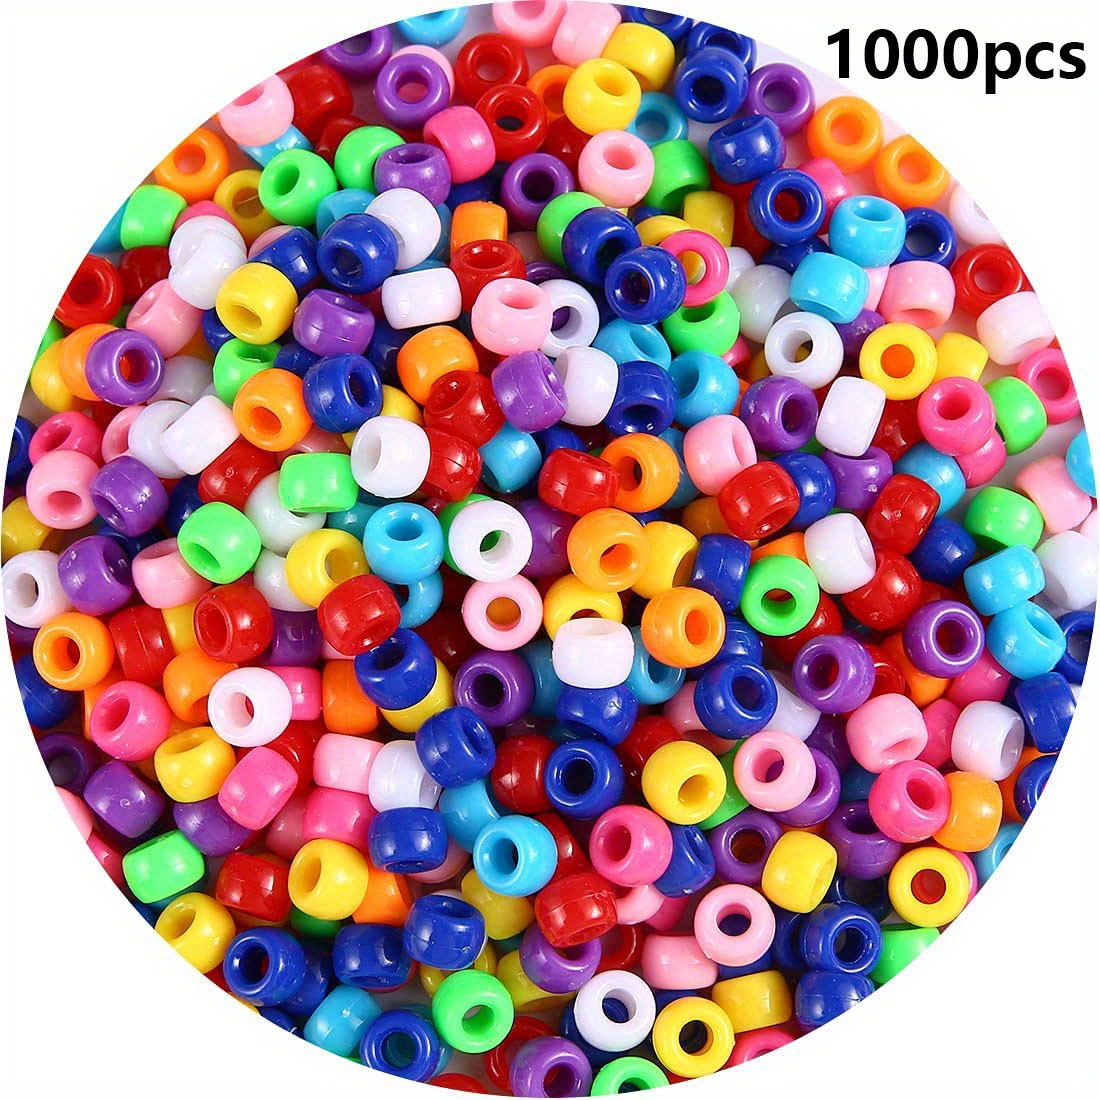 50-200Pcs 6x9mm Big Hole African Hair Beads Candy Acrylic Beads